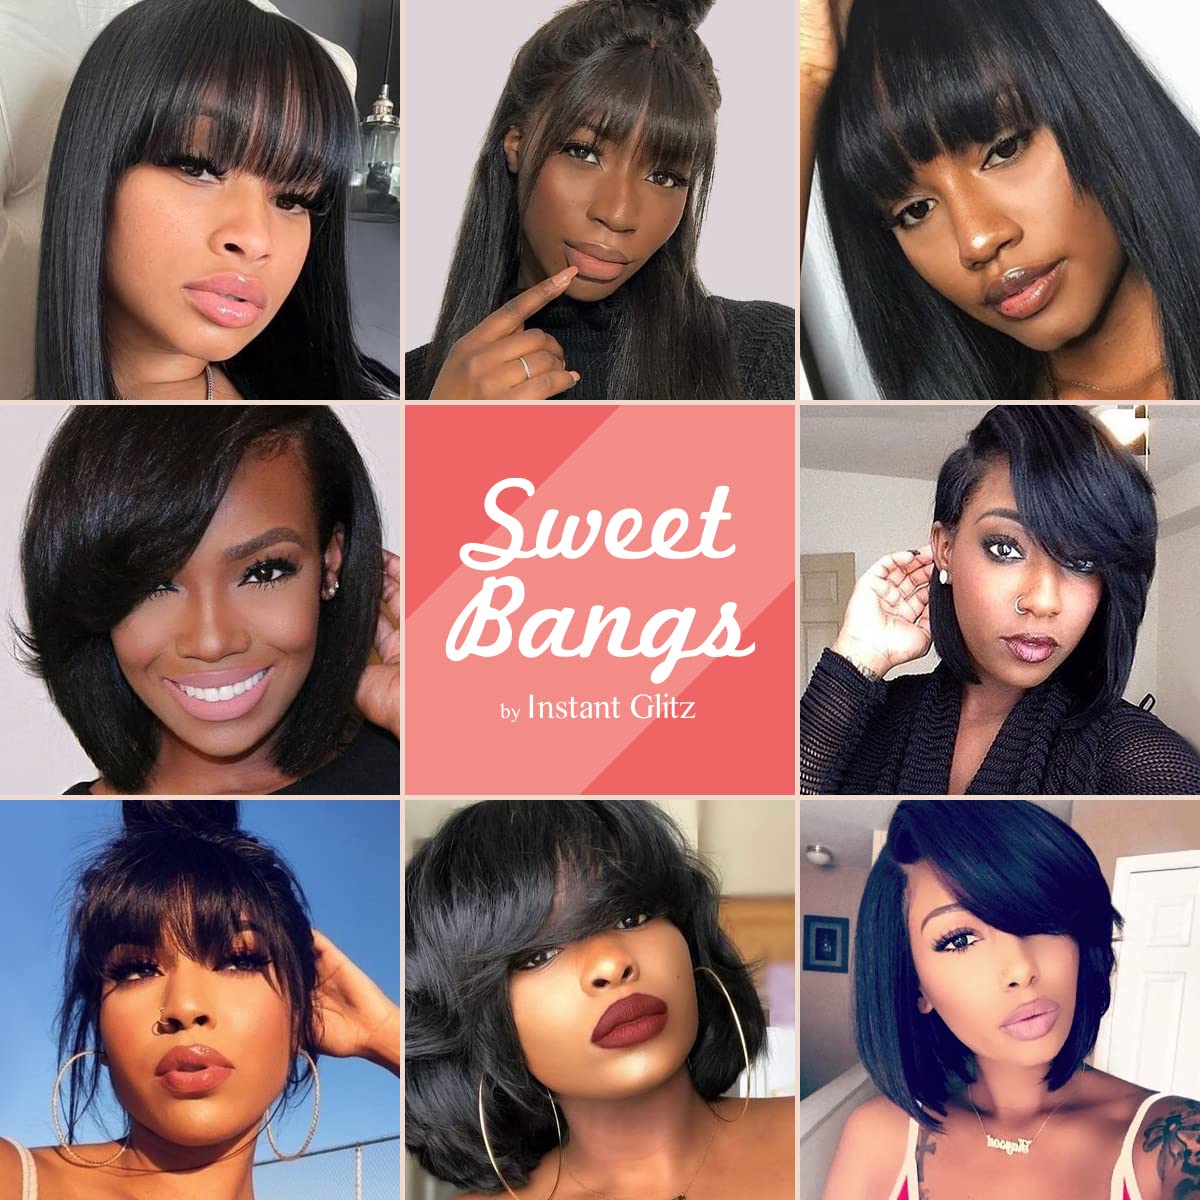 Instant Glitz Bangs Hair Clip In Bangs Clip on Bangs Sweet Bangs Fringe Bang Synthetic Hair Piece Hair Extenstions for Women Sweet Bangs - Fringe Bang (2) Find Your New Look Today!